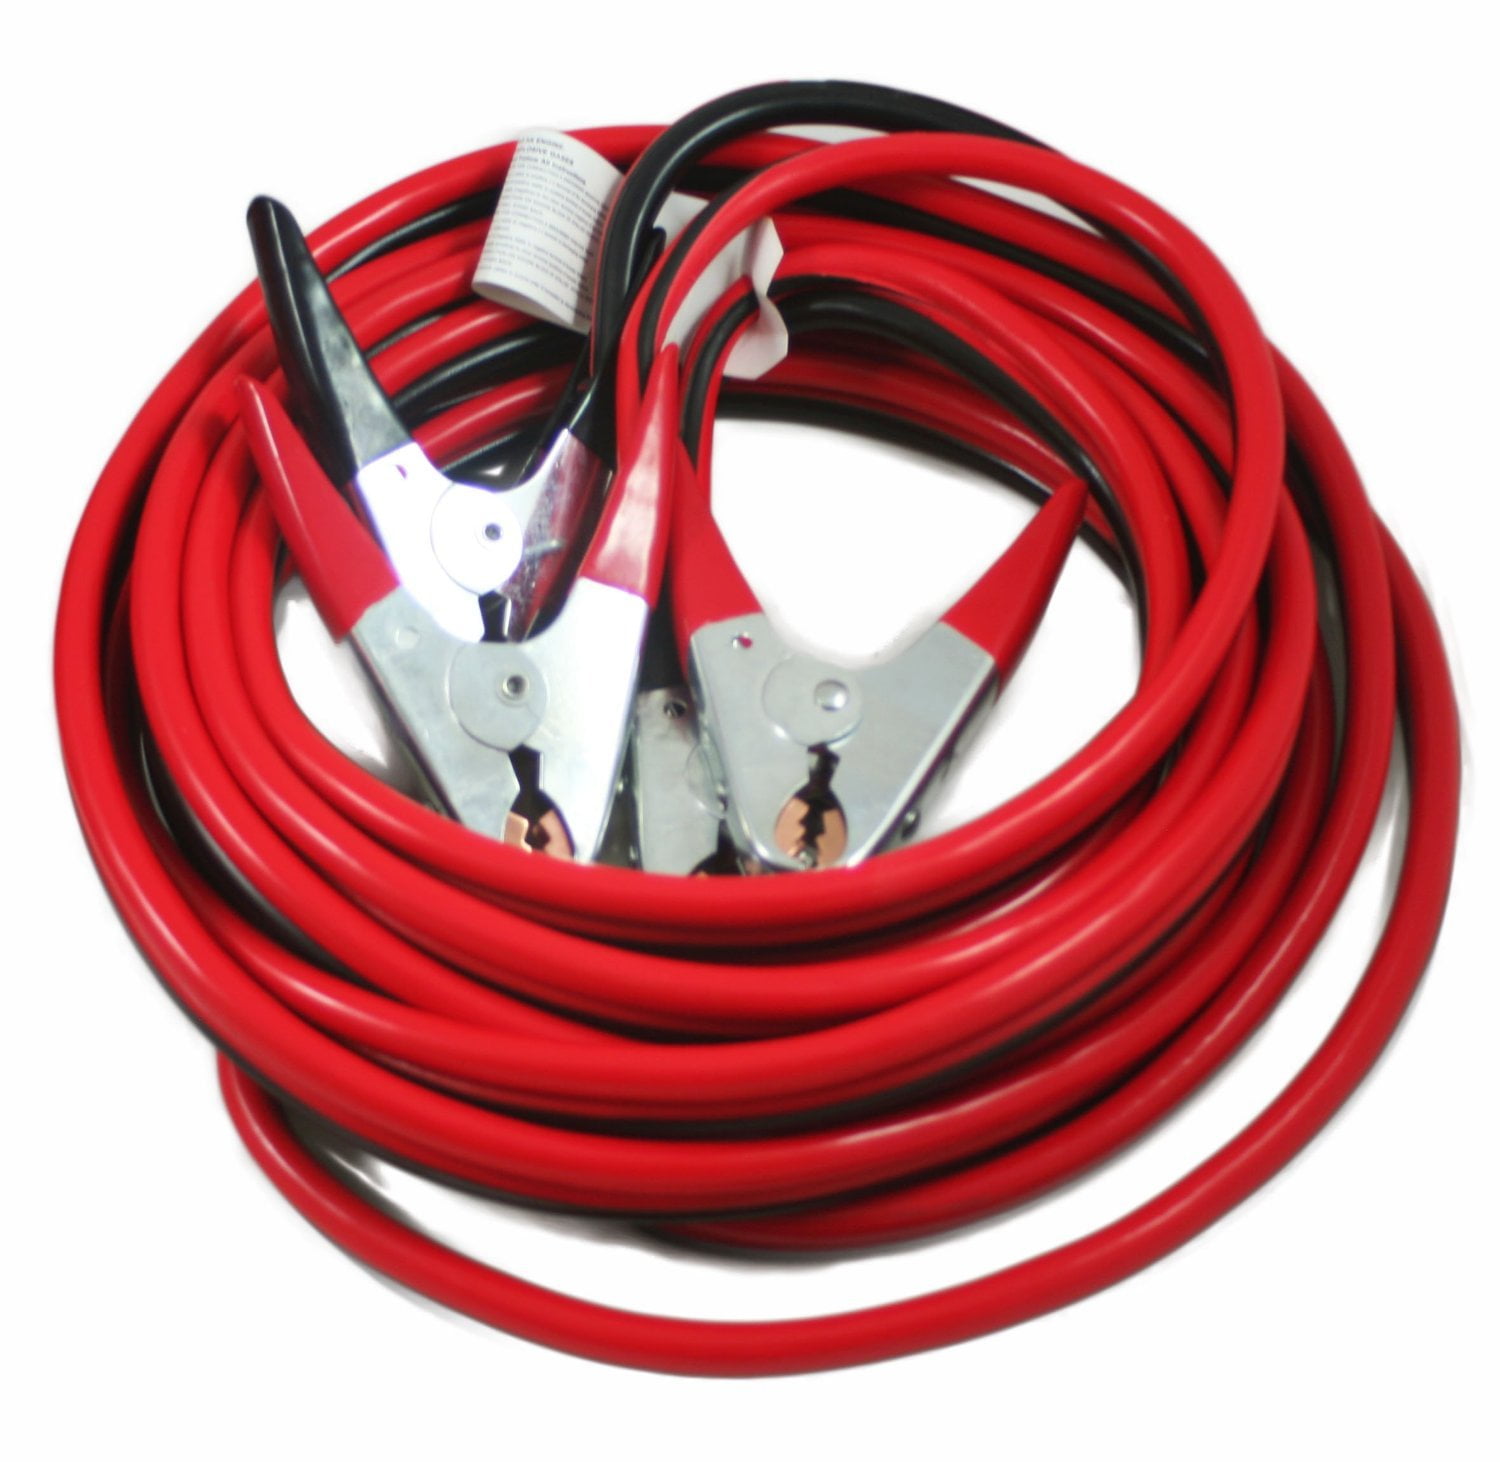 Comercial Heavy Duty 25 FT 2 Gauge Booster Cables Cables Battery Power Jumper 